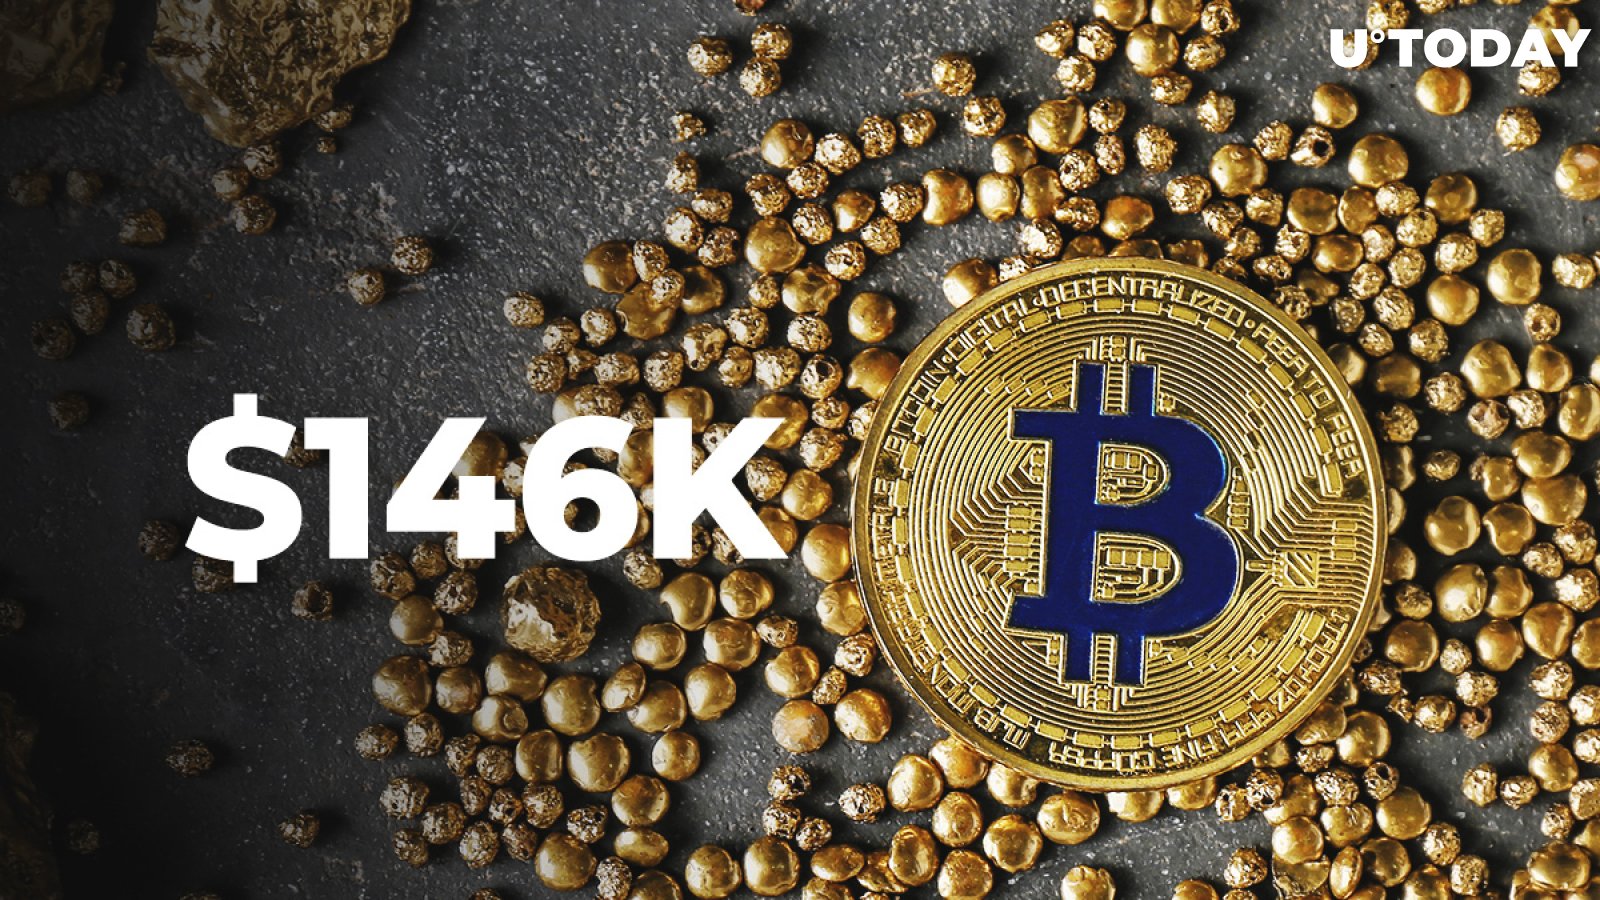 JPMorgan Expects Bitcoin to Reach $146K After Crowding Out Gold